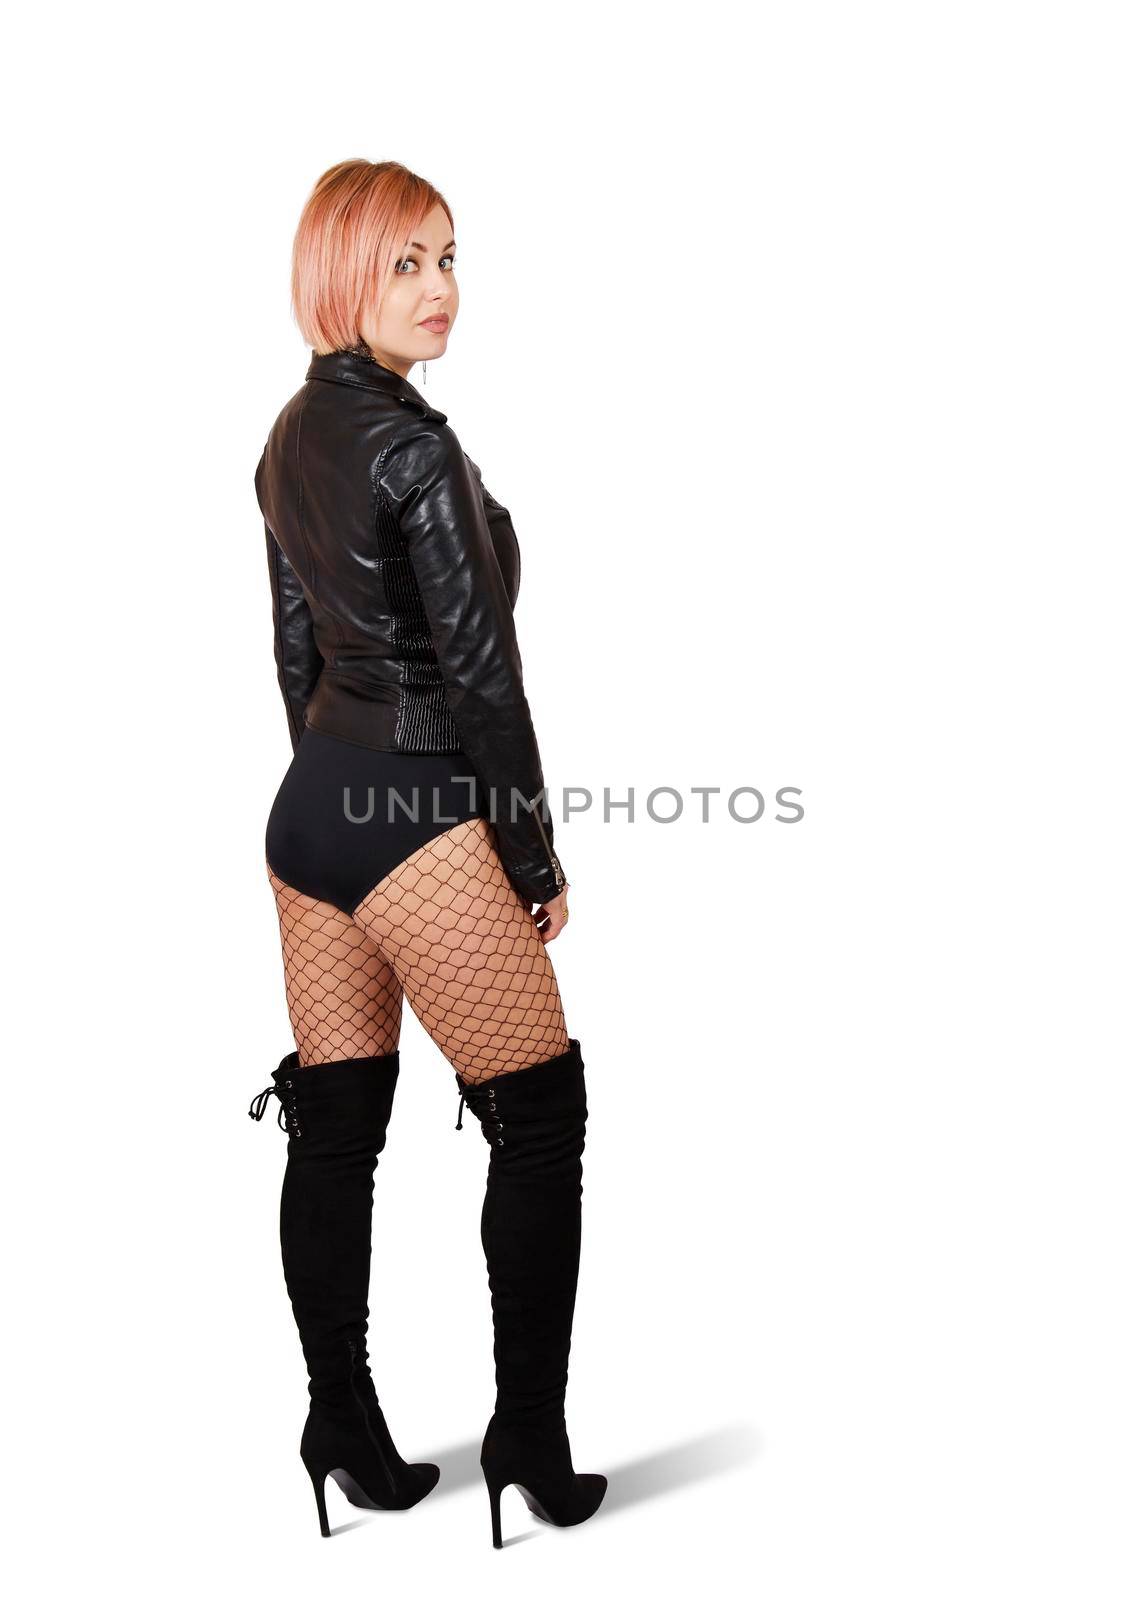 young woman in leather jacket, mesh tights and boots posing standing in studio on white background